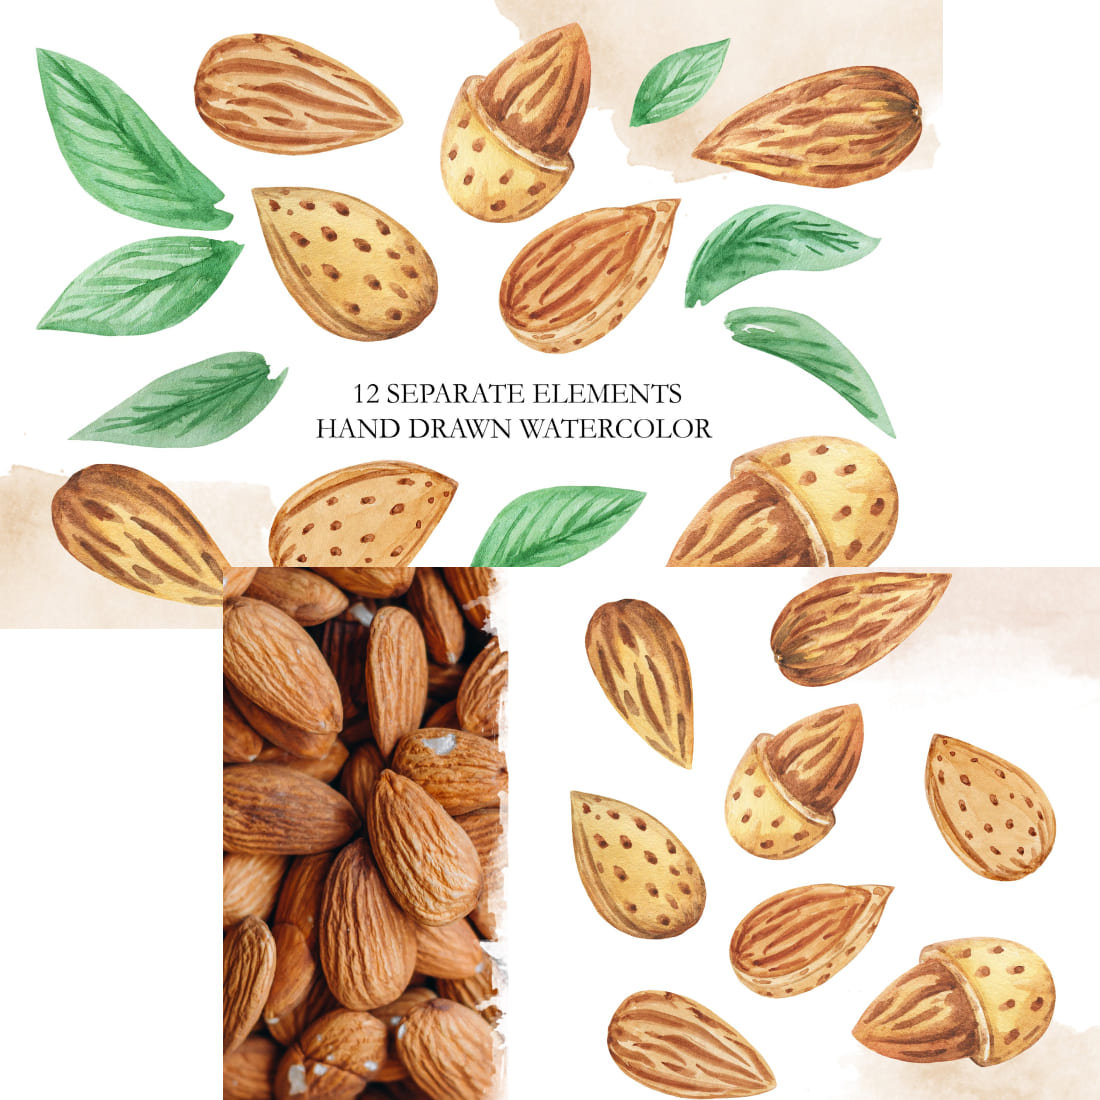 Realistic image of almond and painted almond watercolor.